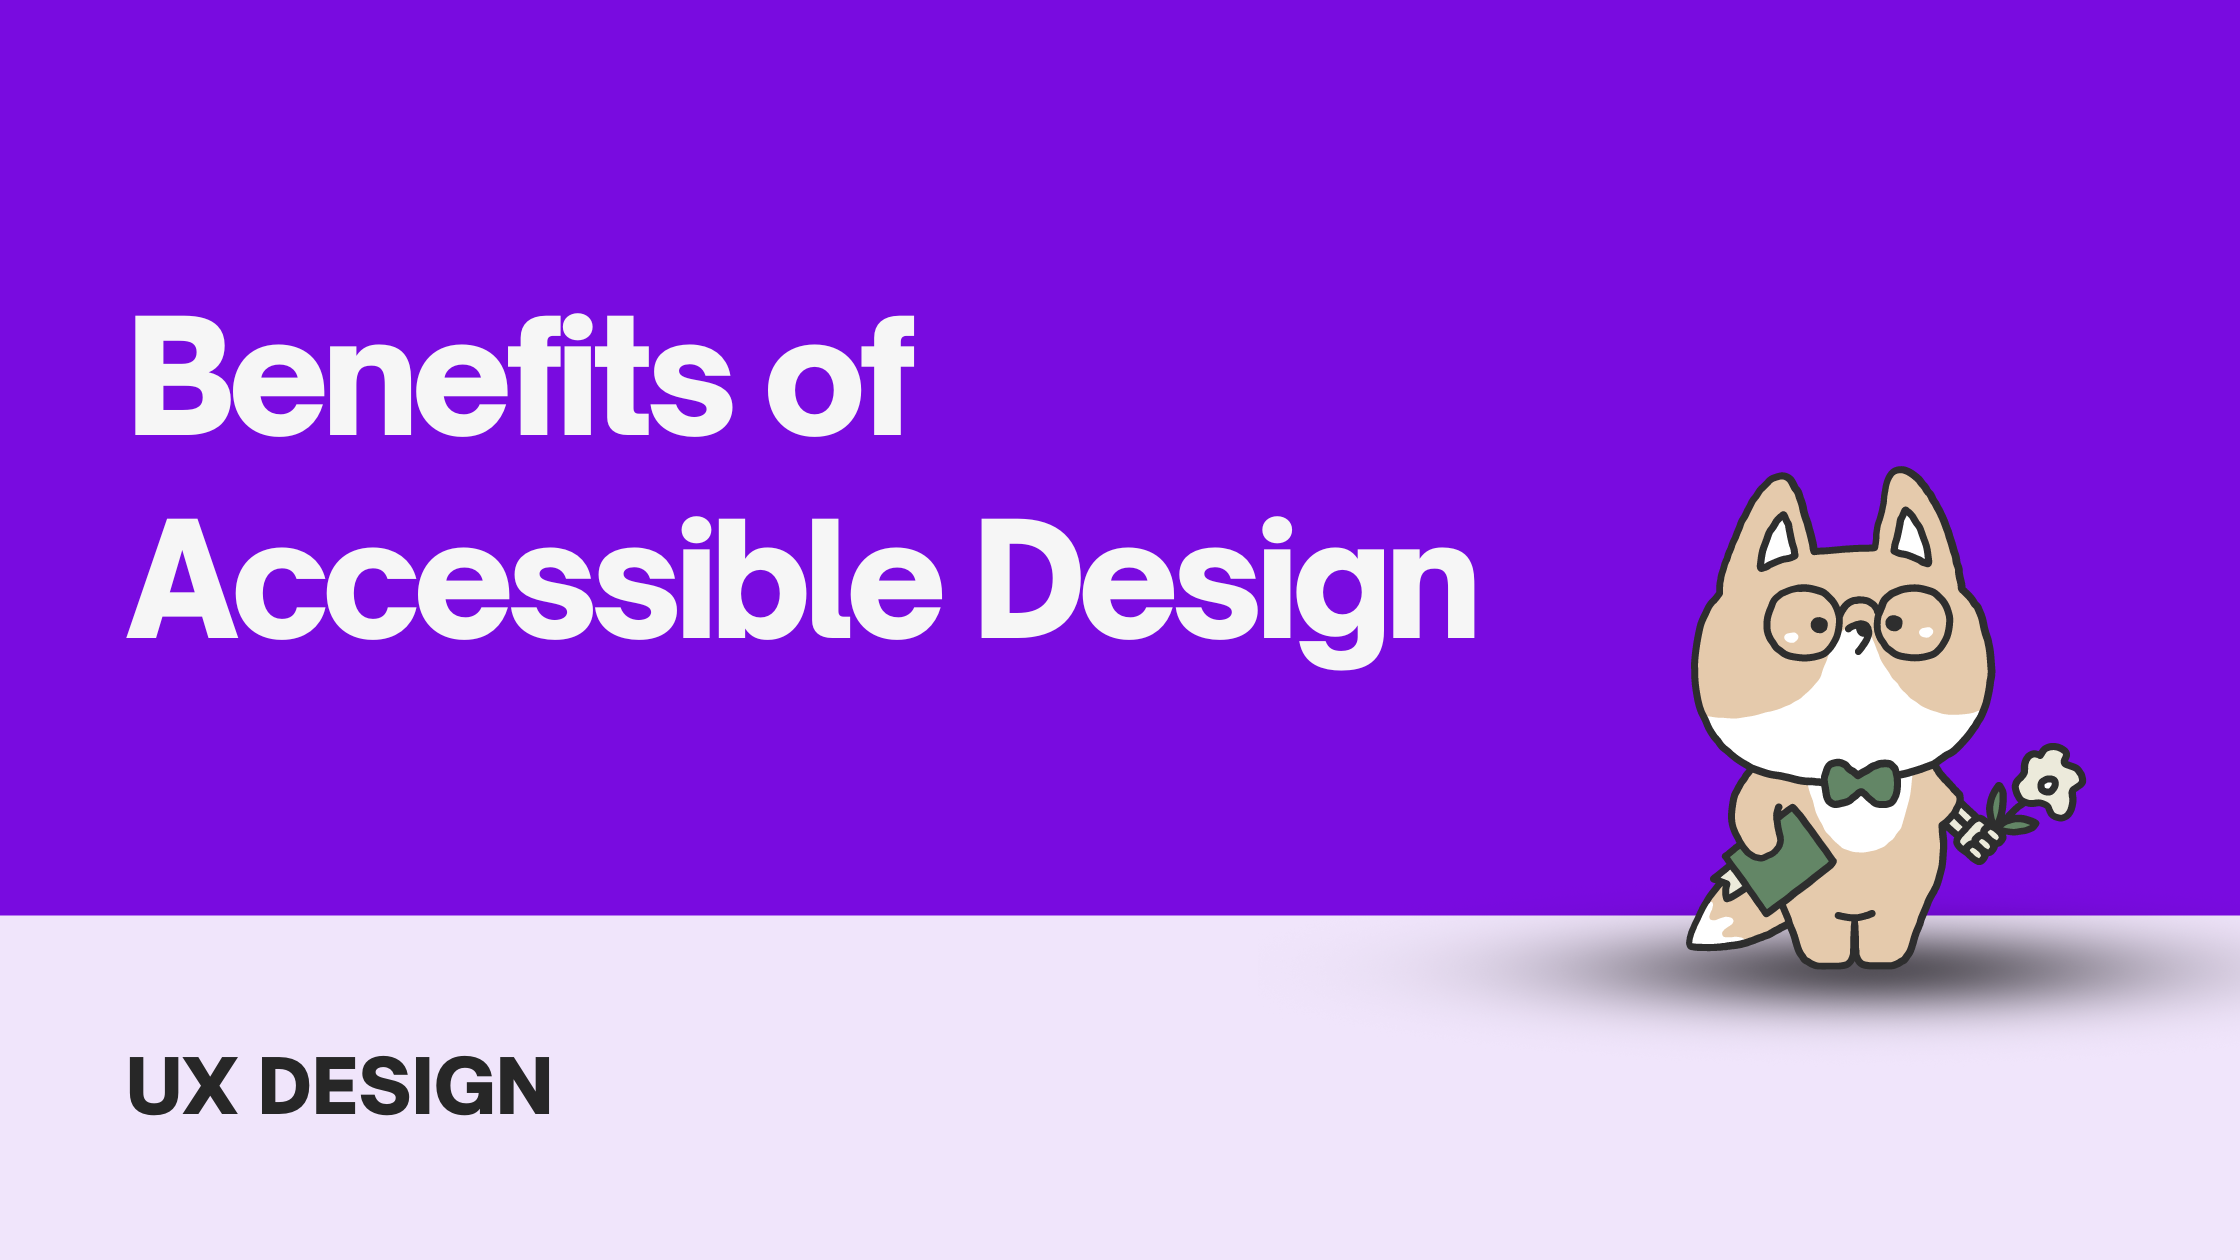 Benefits of Accessible Design